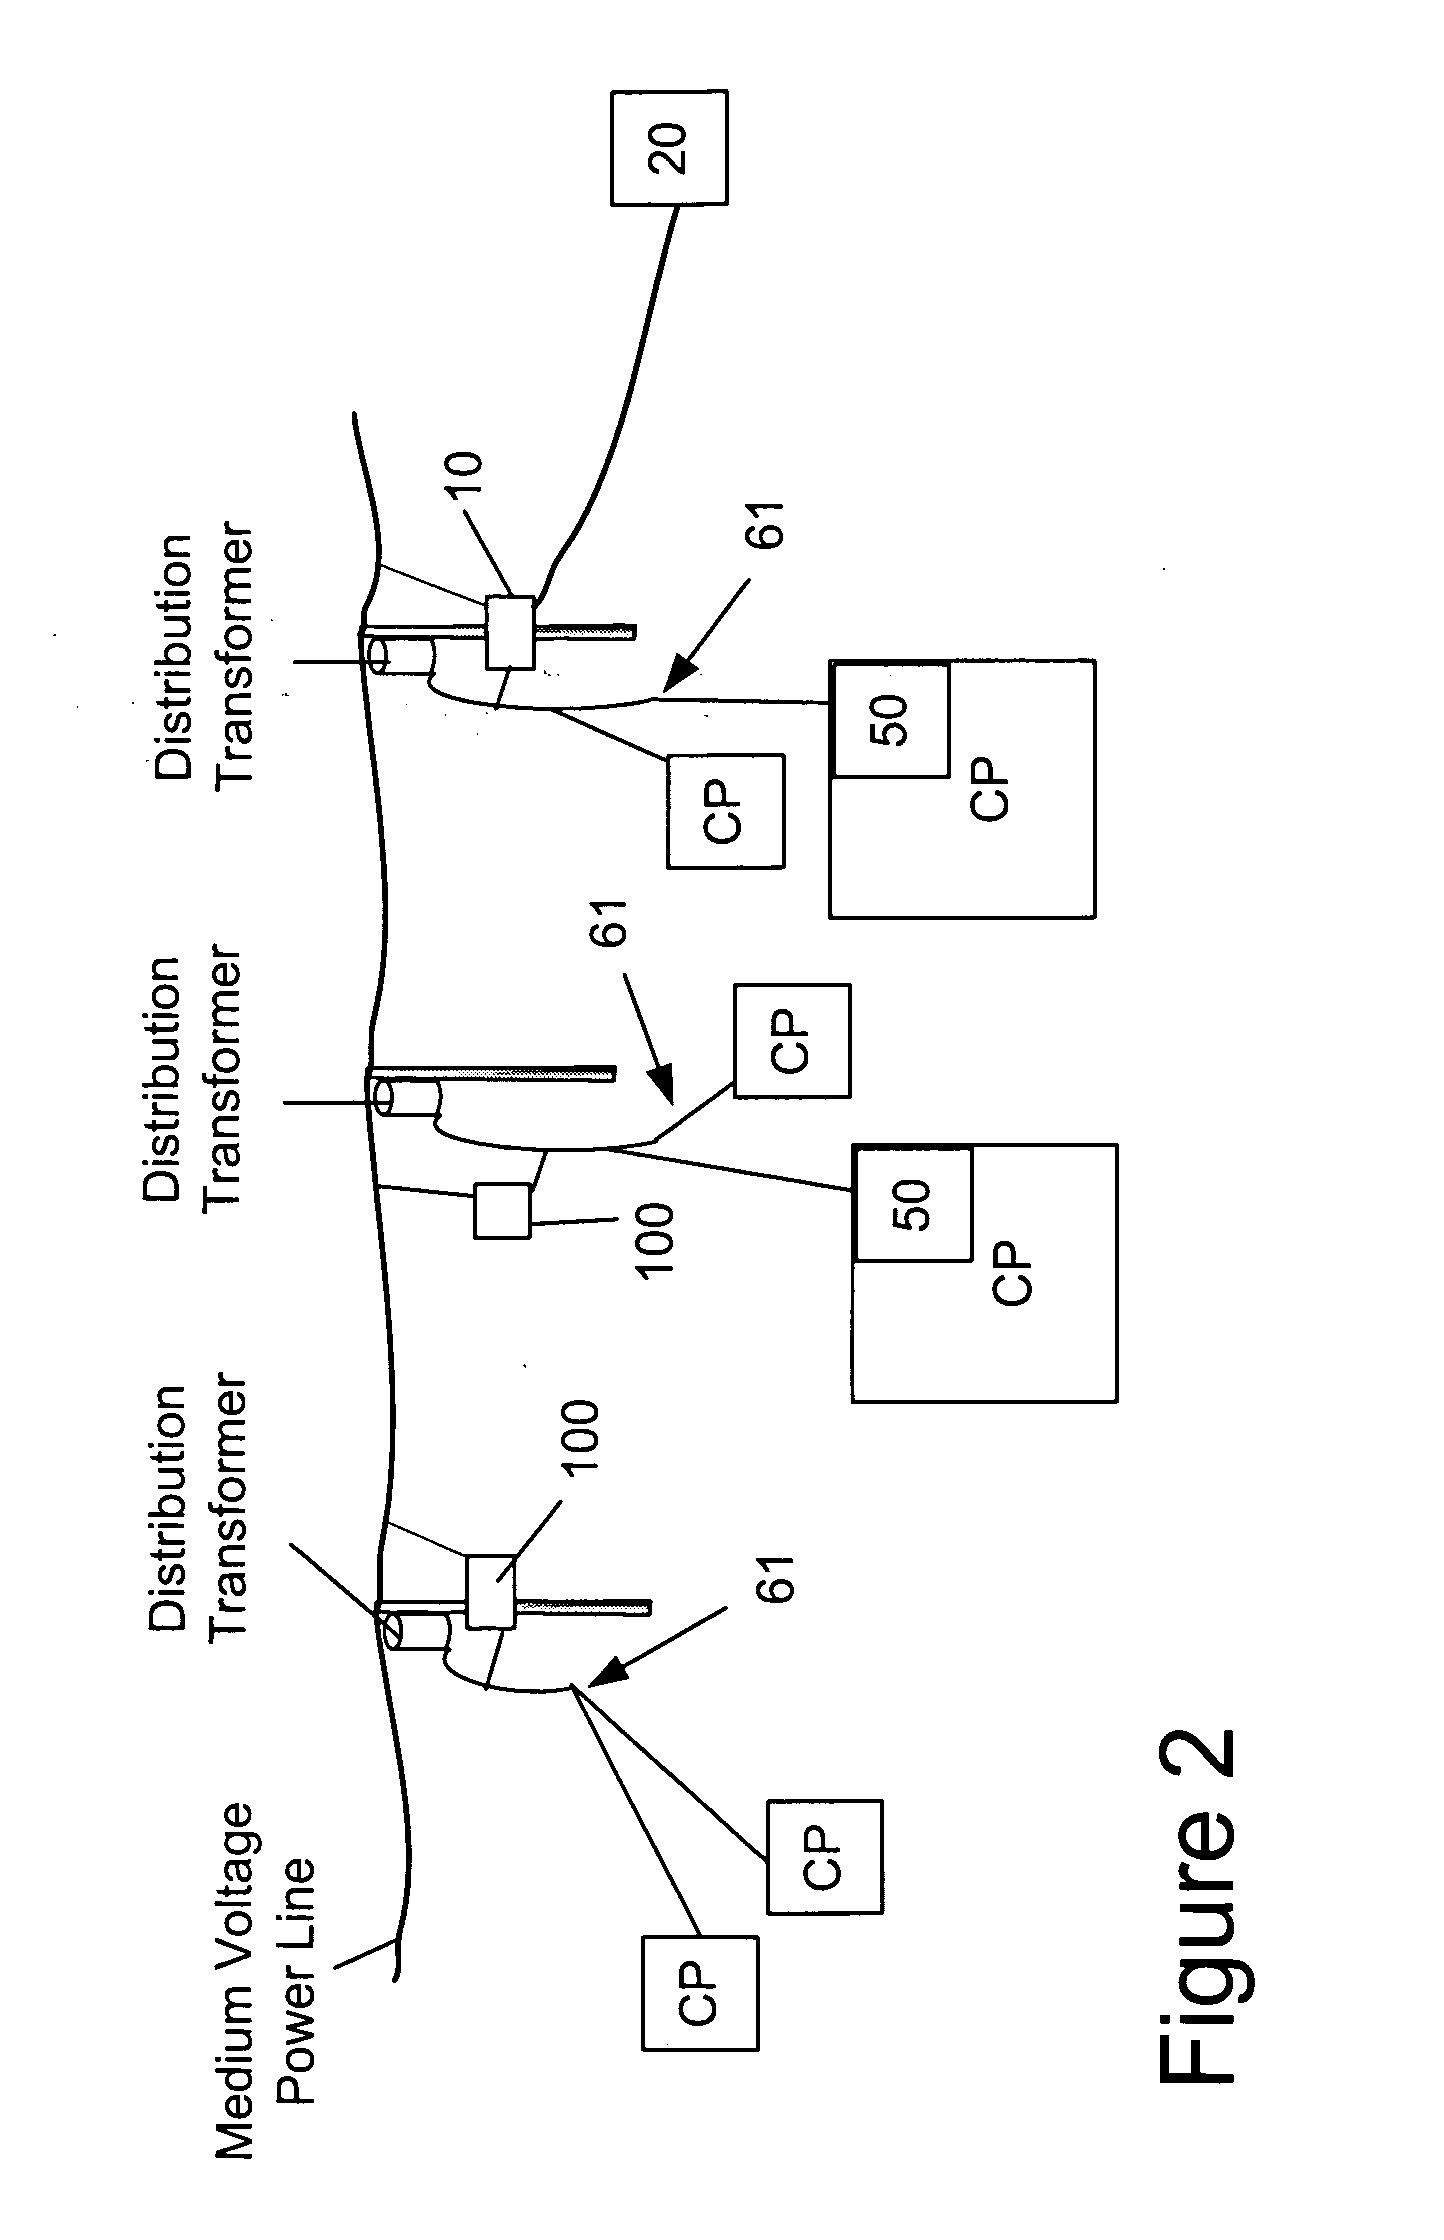 Power line communication system with automated meter reading